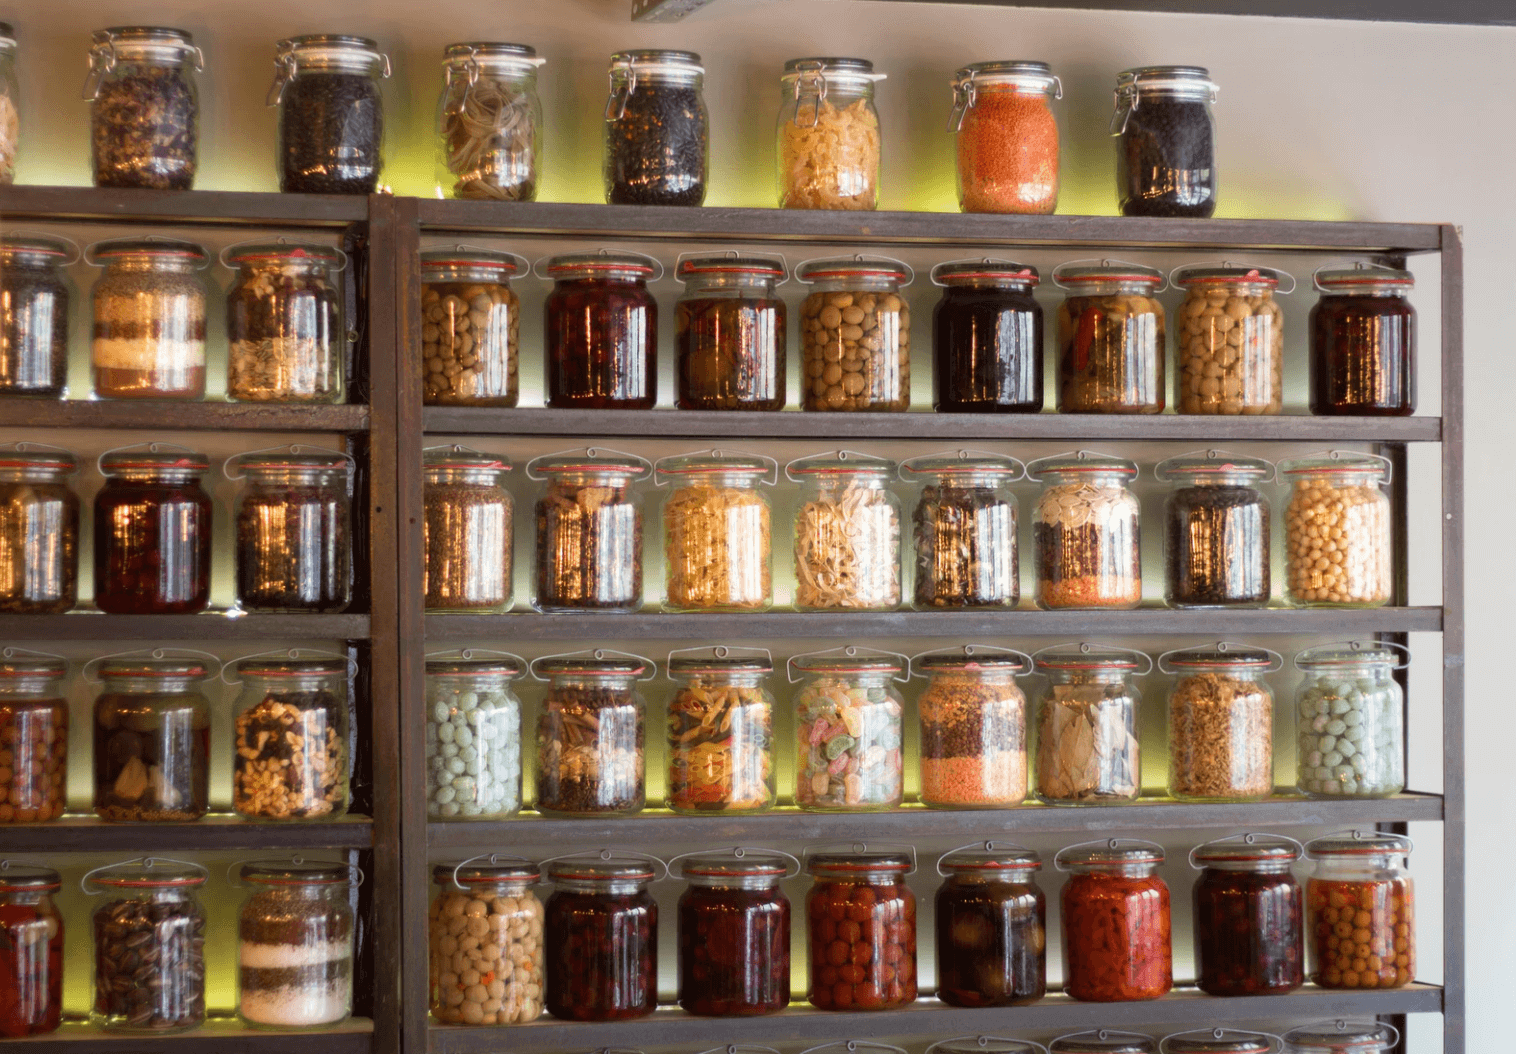 Jars of different colors stored.